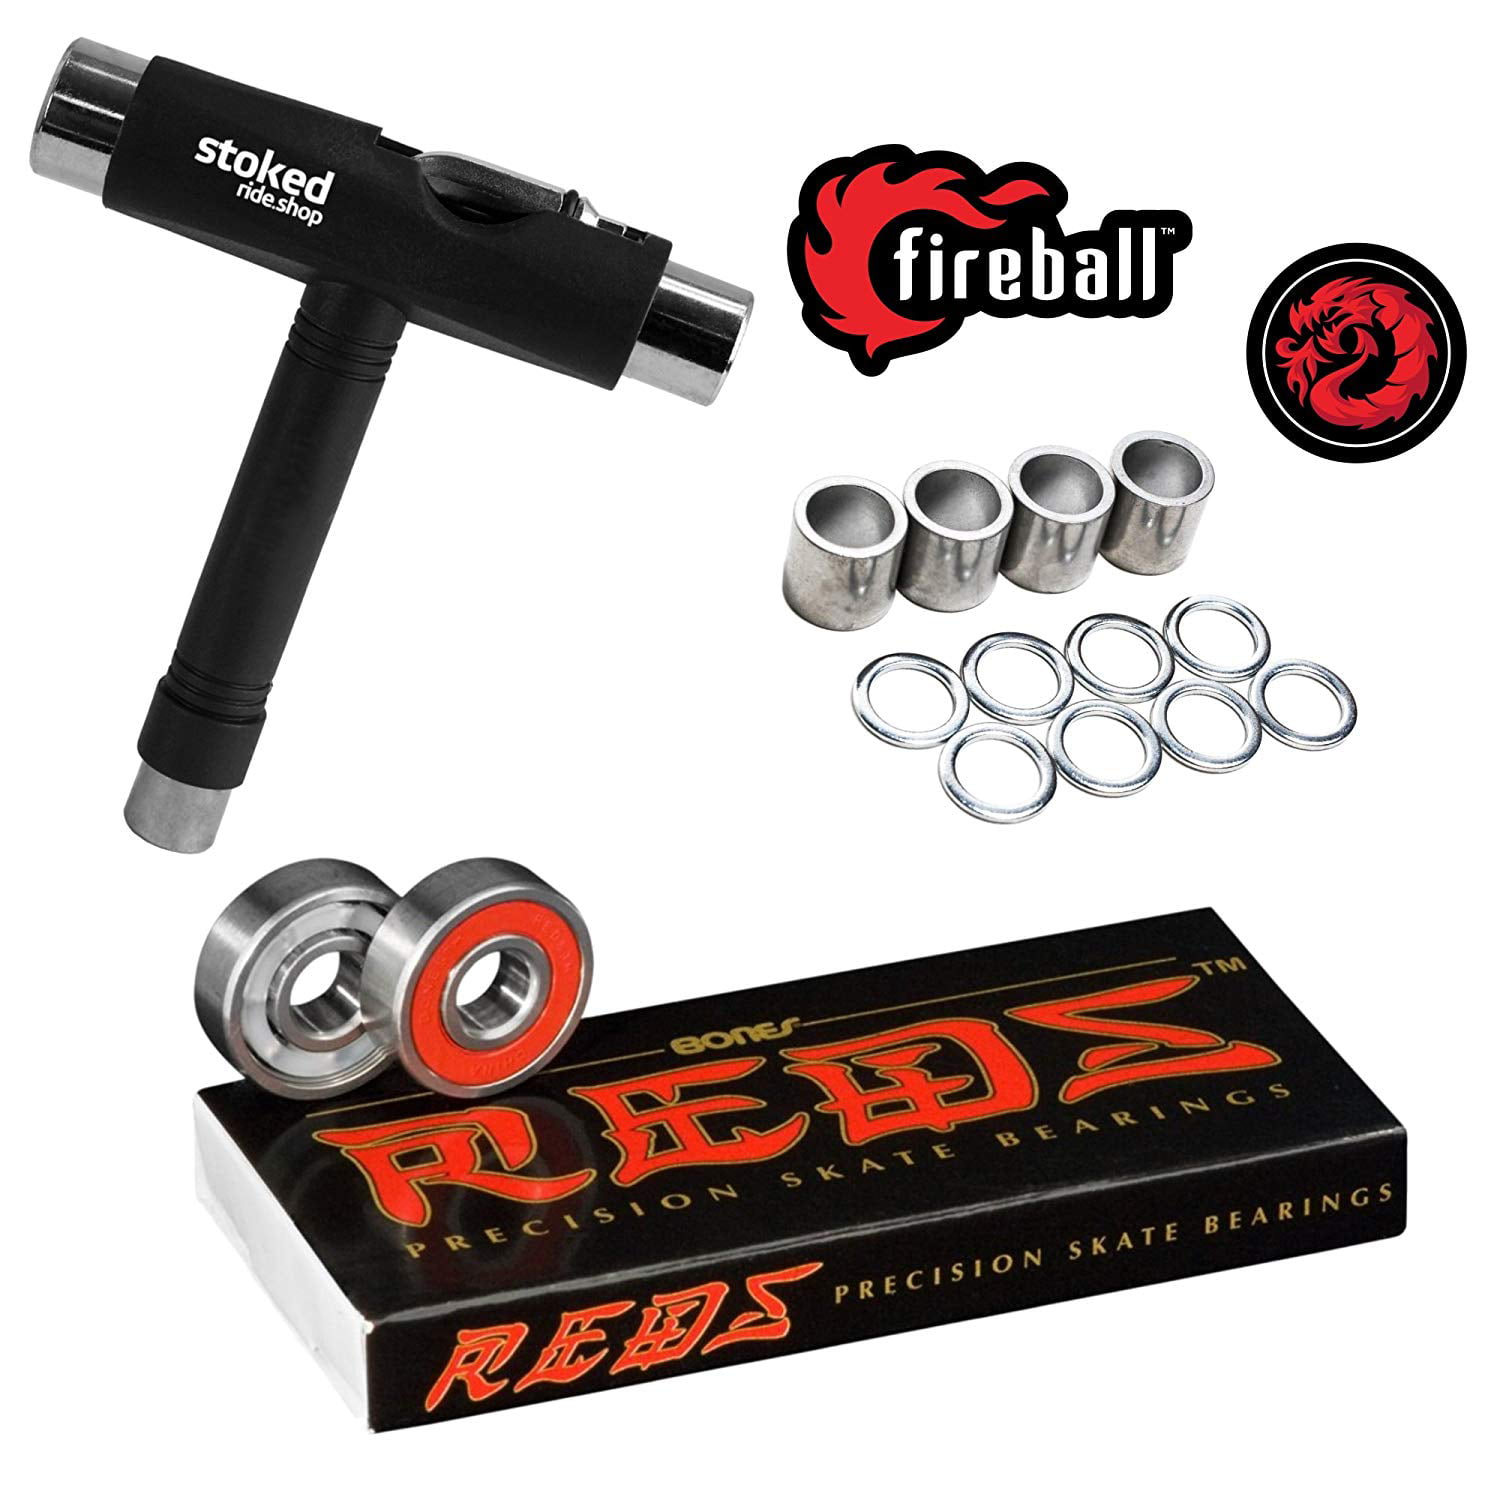 Bones Reds Bearings for [Skateboards, Longboards, Scooters, Spinners] (8  Pack (w/Dragon Spacers, Washers & Stoked Tool))